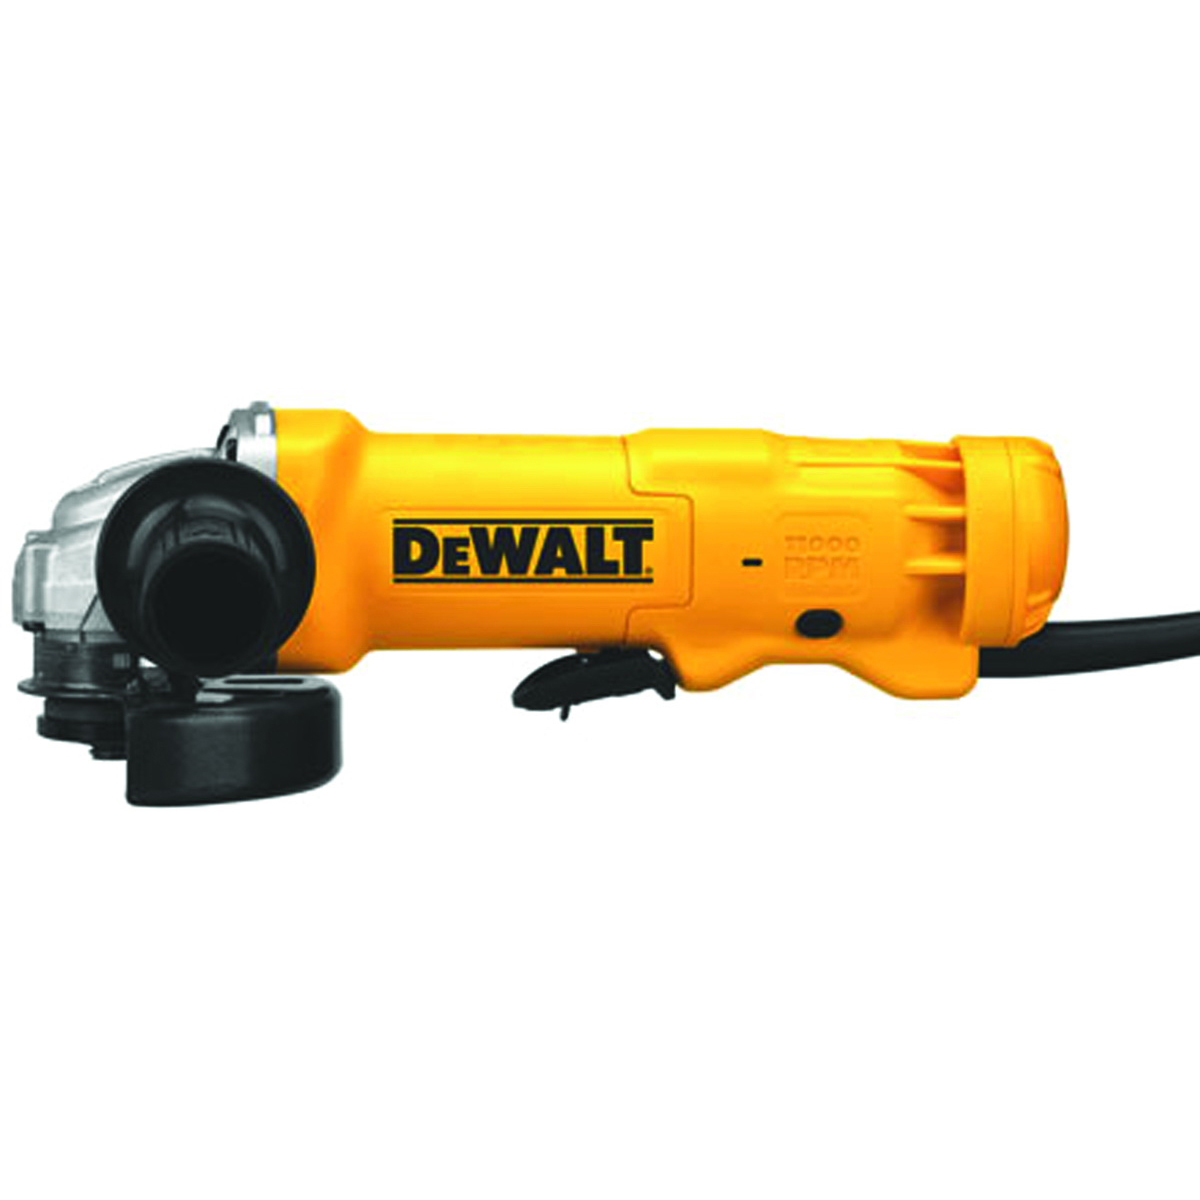 DeWALT DWE402 Small Angle Grinder, 11 A, 5/8-11 Spindle, 4-1/2 in Dia Wheel, 11,000 rpm Speed - 10